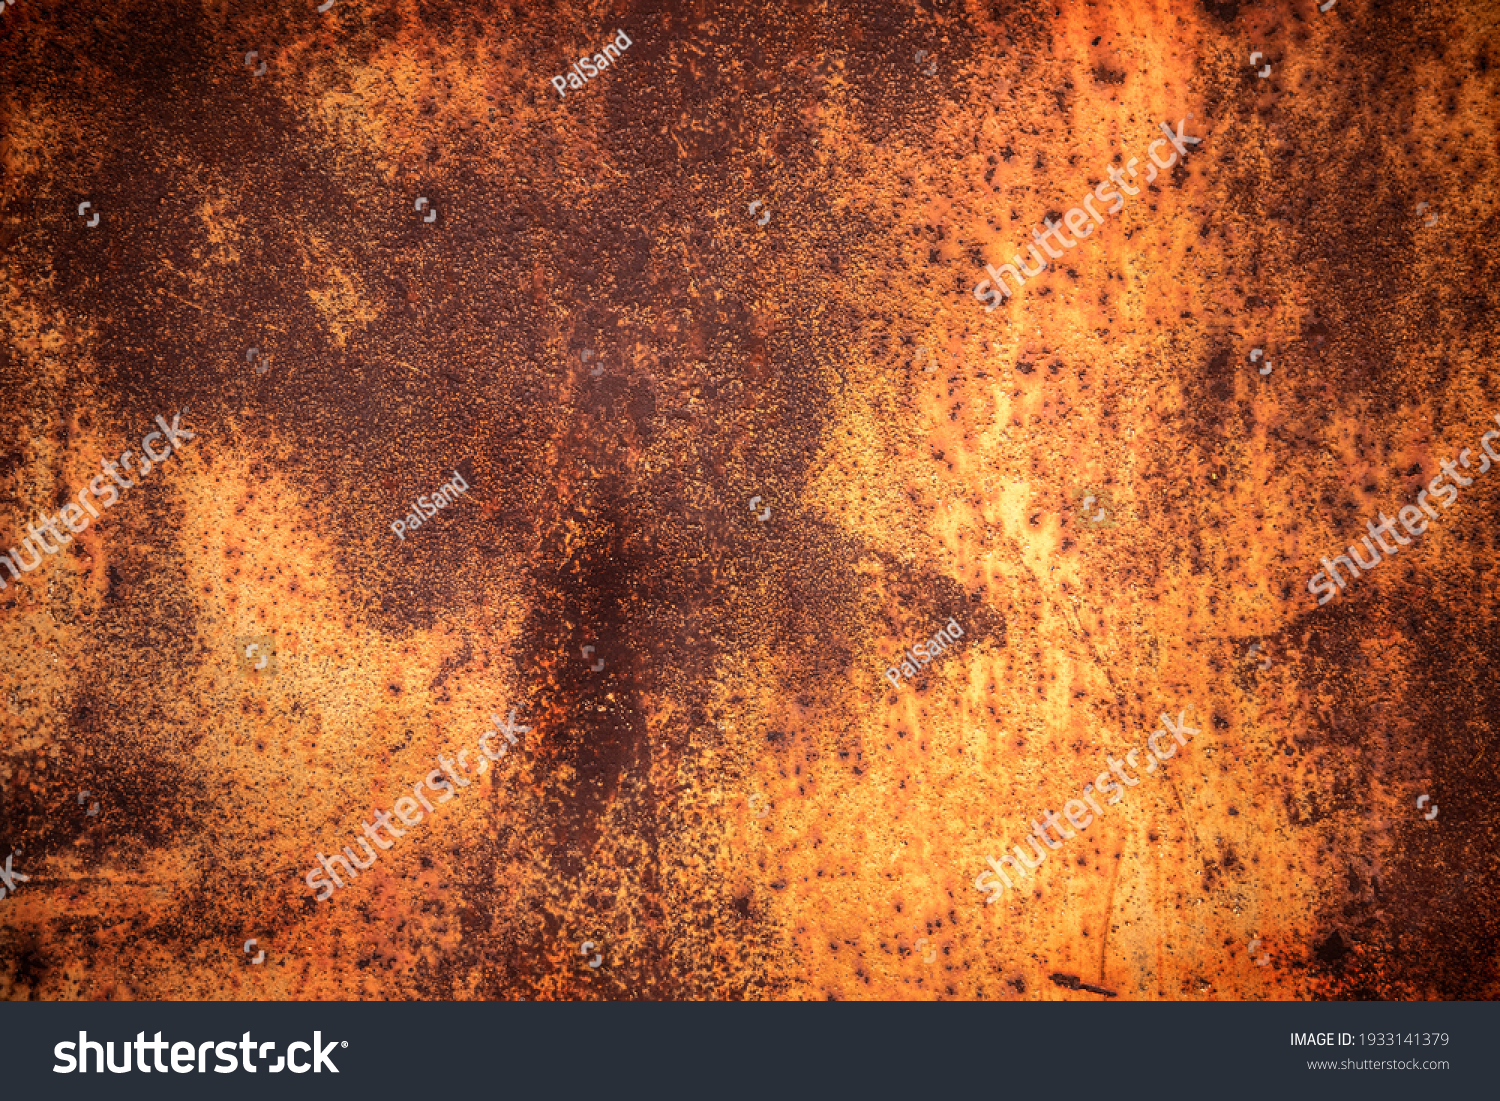 Grunge rusted metal texture. Rusty corrosion and oxidized background. Worn metallic iron rusty metal background #1933141379